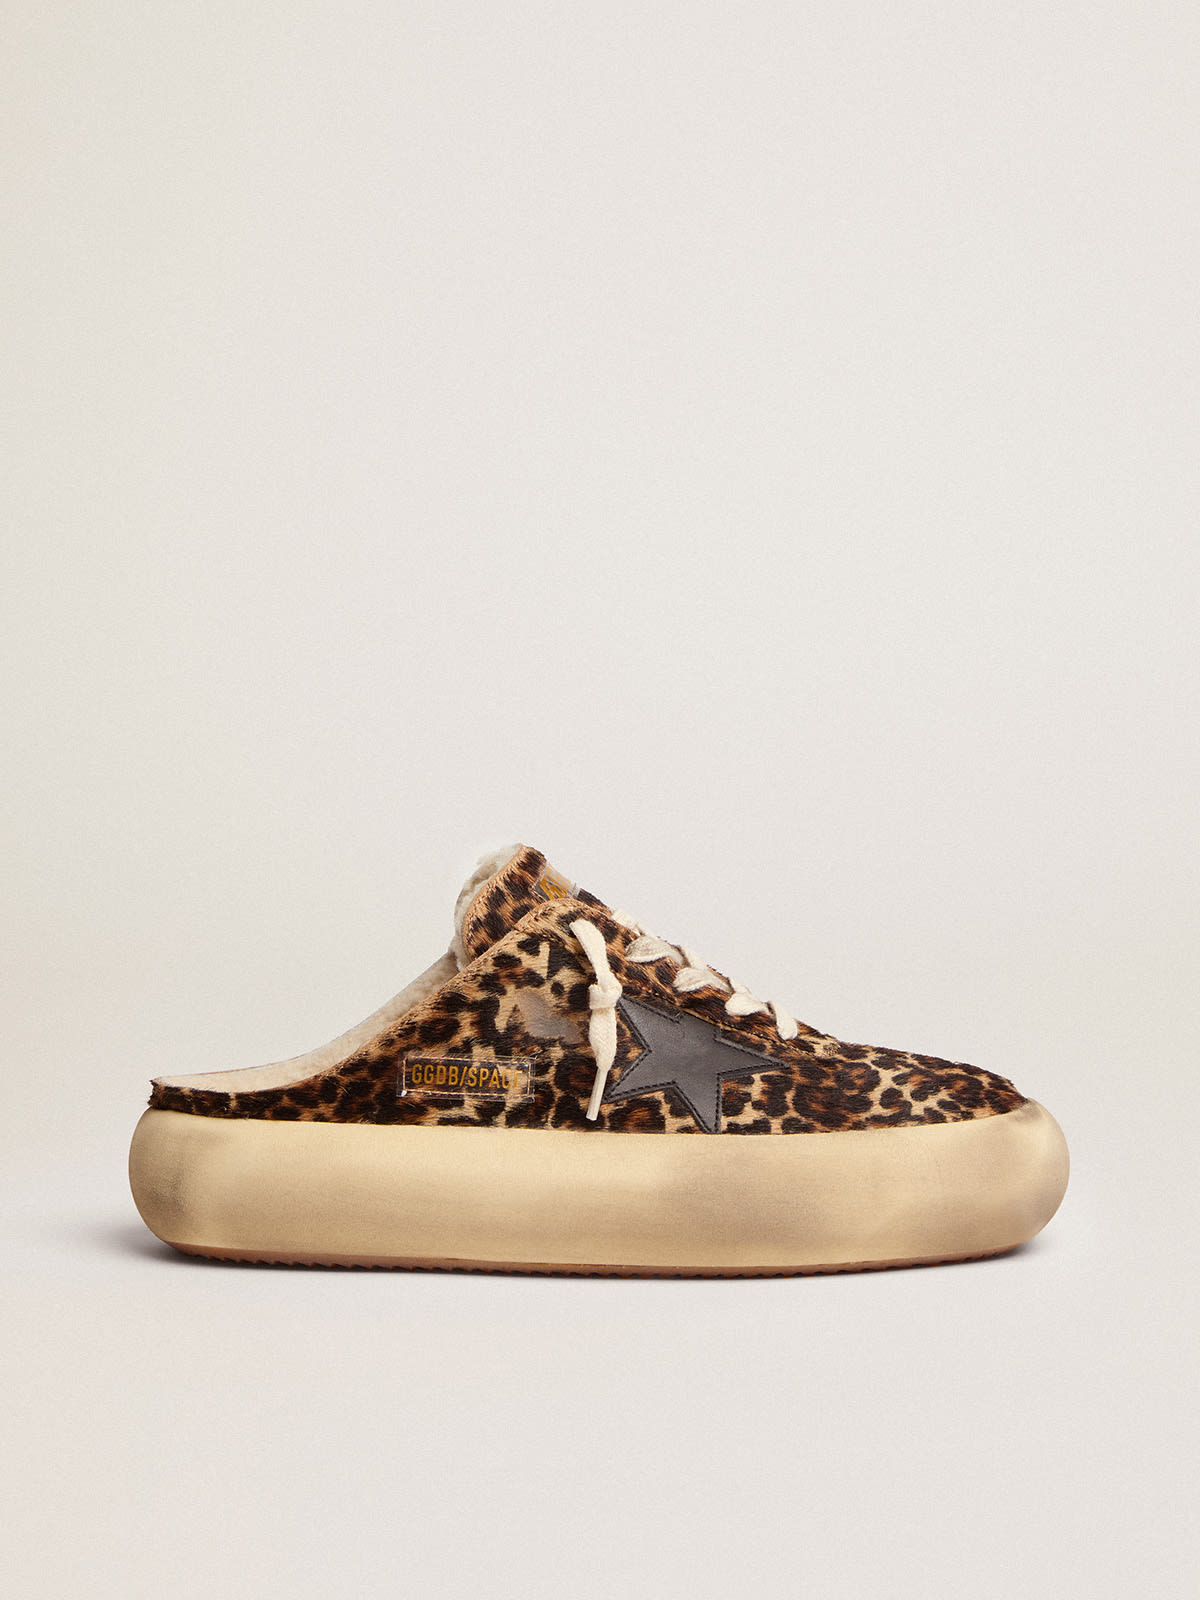 Women's Space-Star Sabot in animal print pony skin and shearling lining